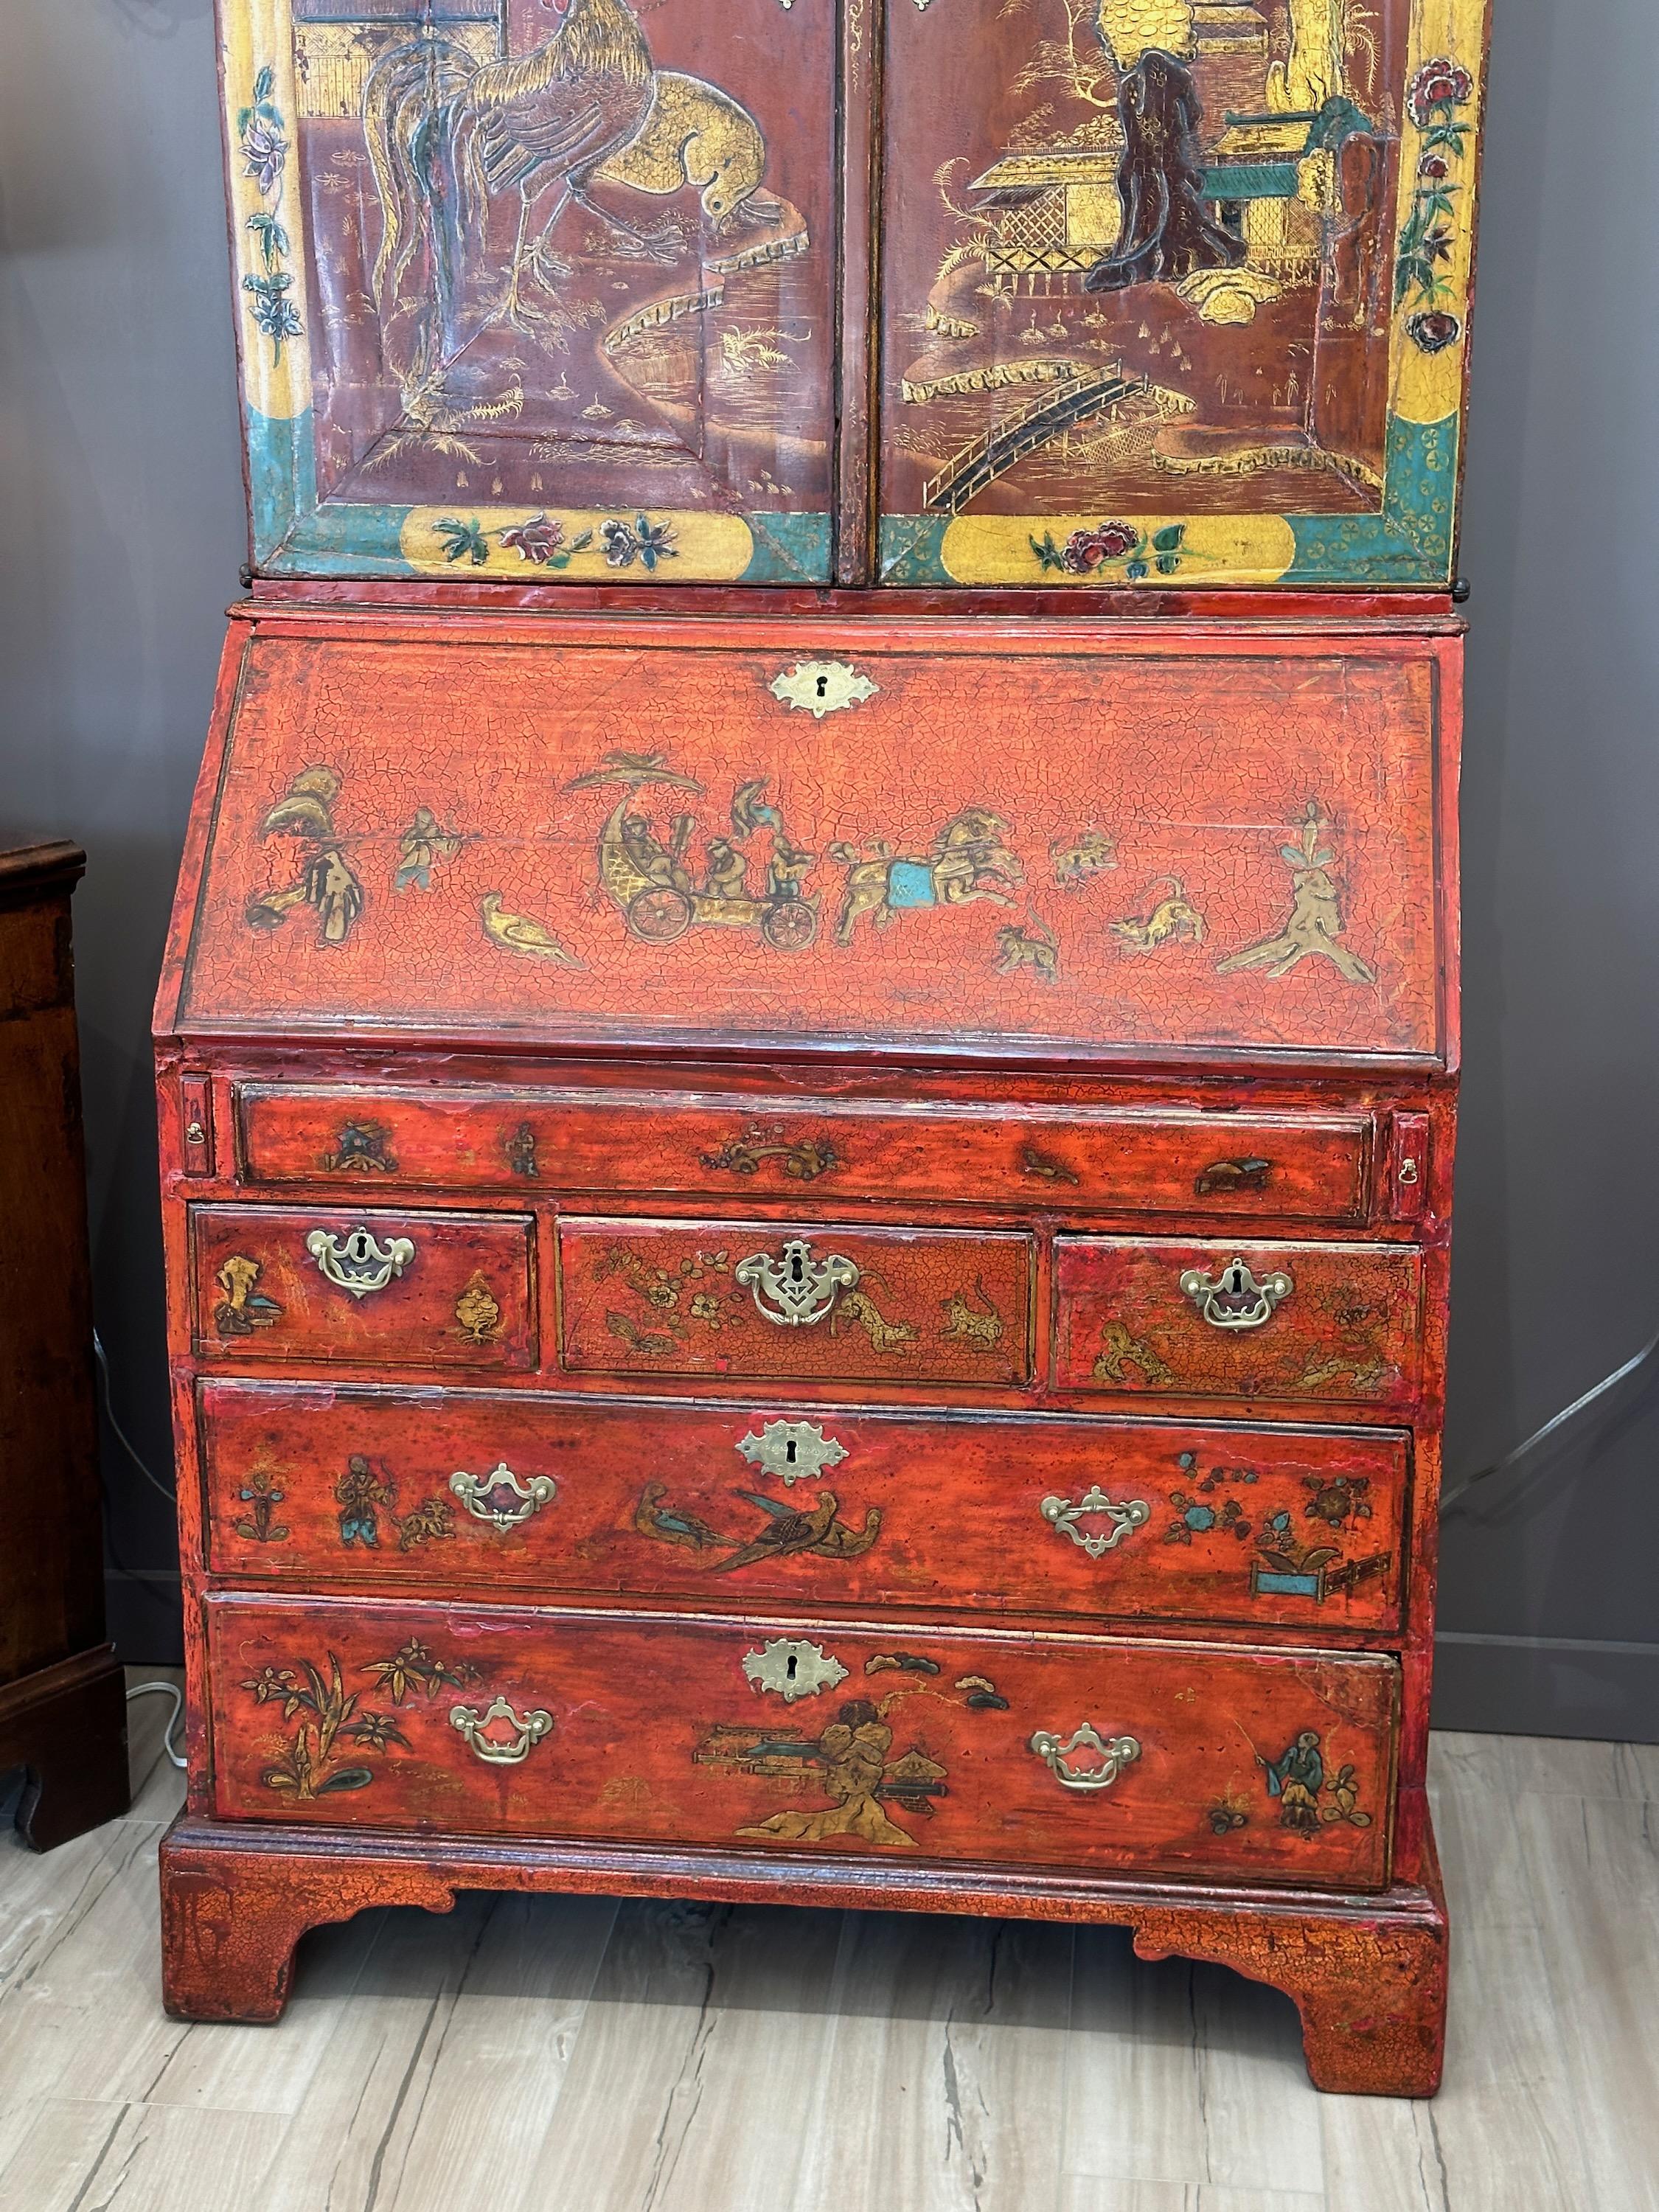 An elegant late 18th C. English scarlet lacquer and chinoiserie decorated blind-door secretary/bookcase with three shelves and three small drawers behind the doors above an extensively outfitted carved and decorated desk area with additional drawers